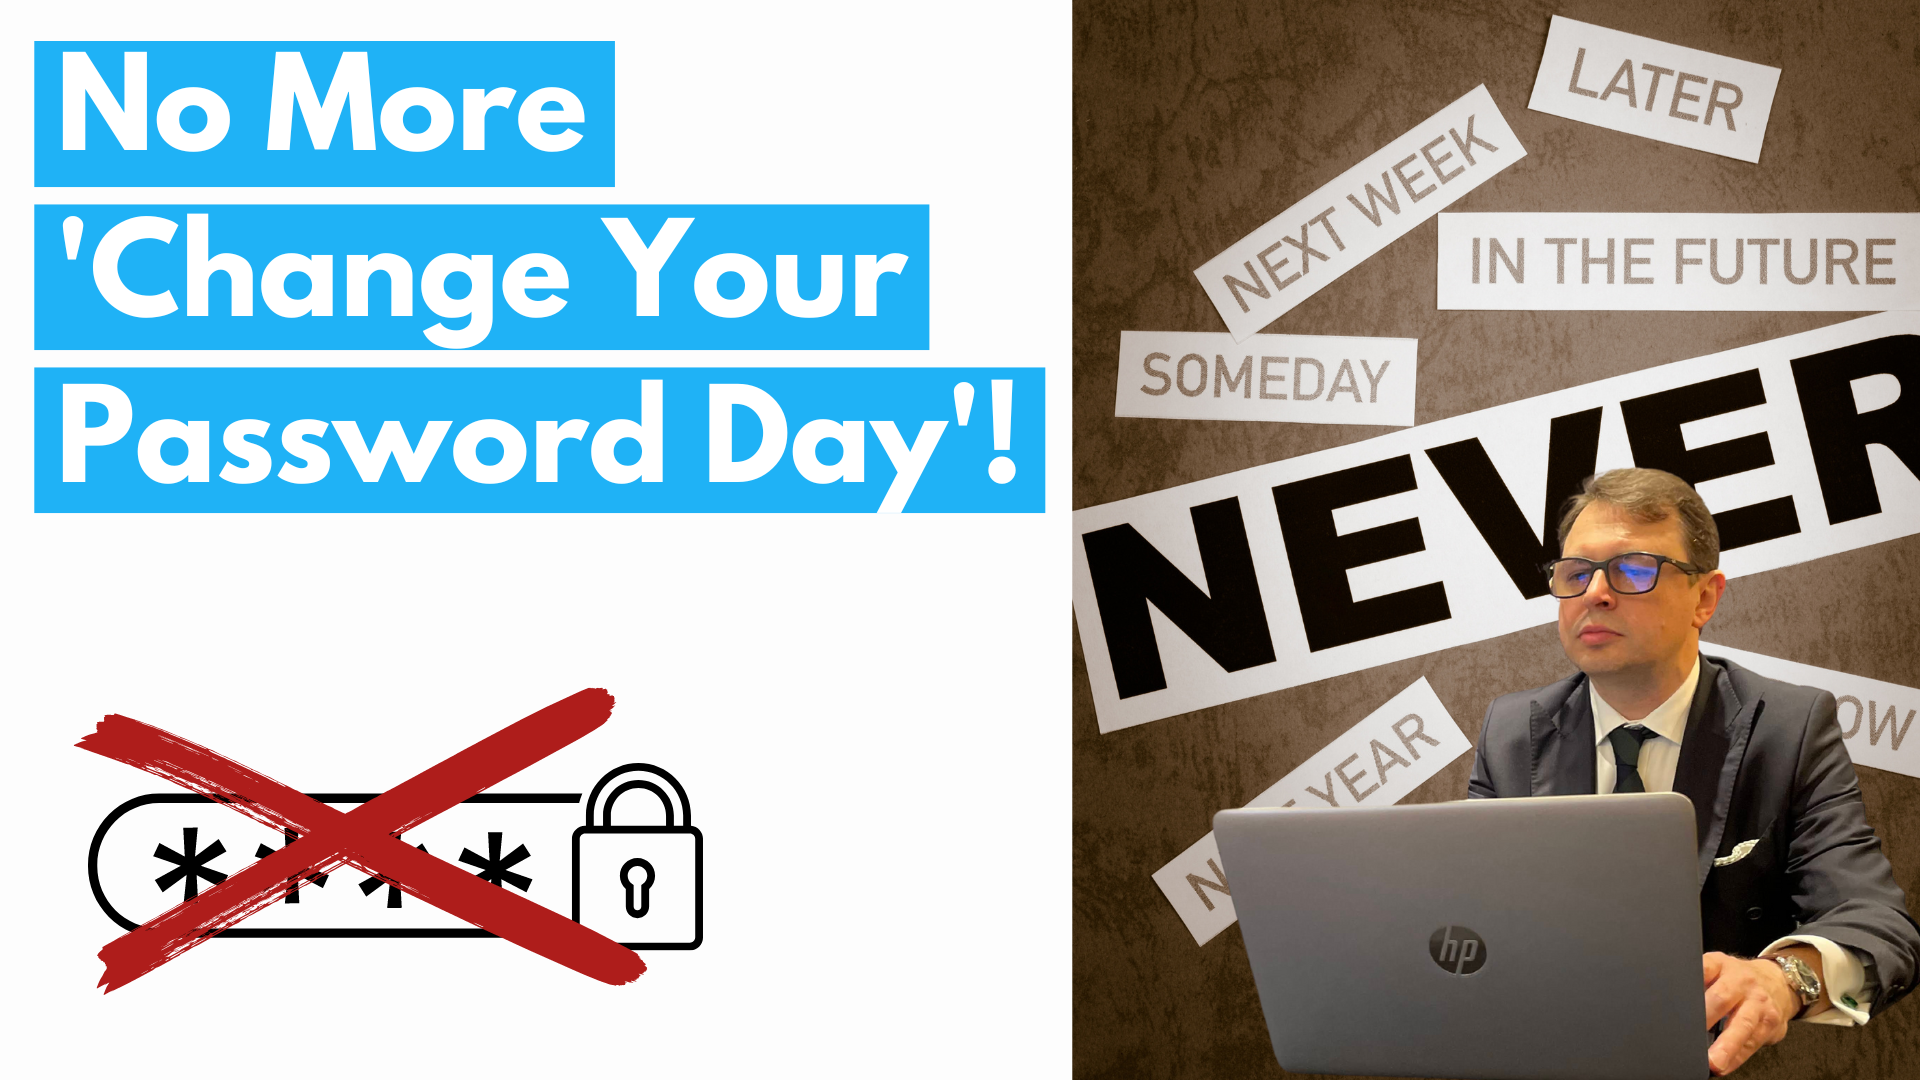 No more 'change your password day'!